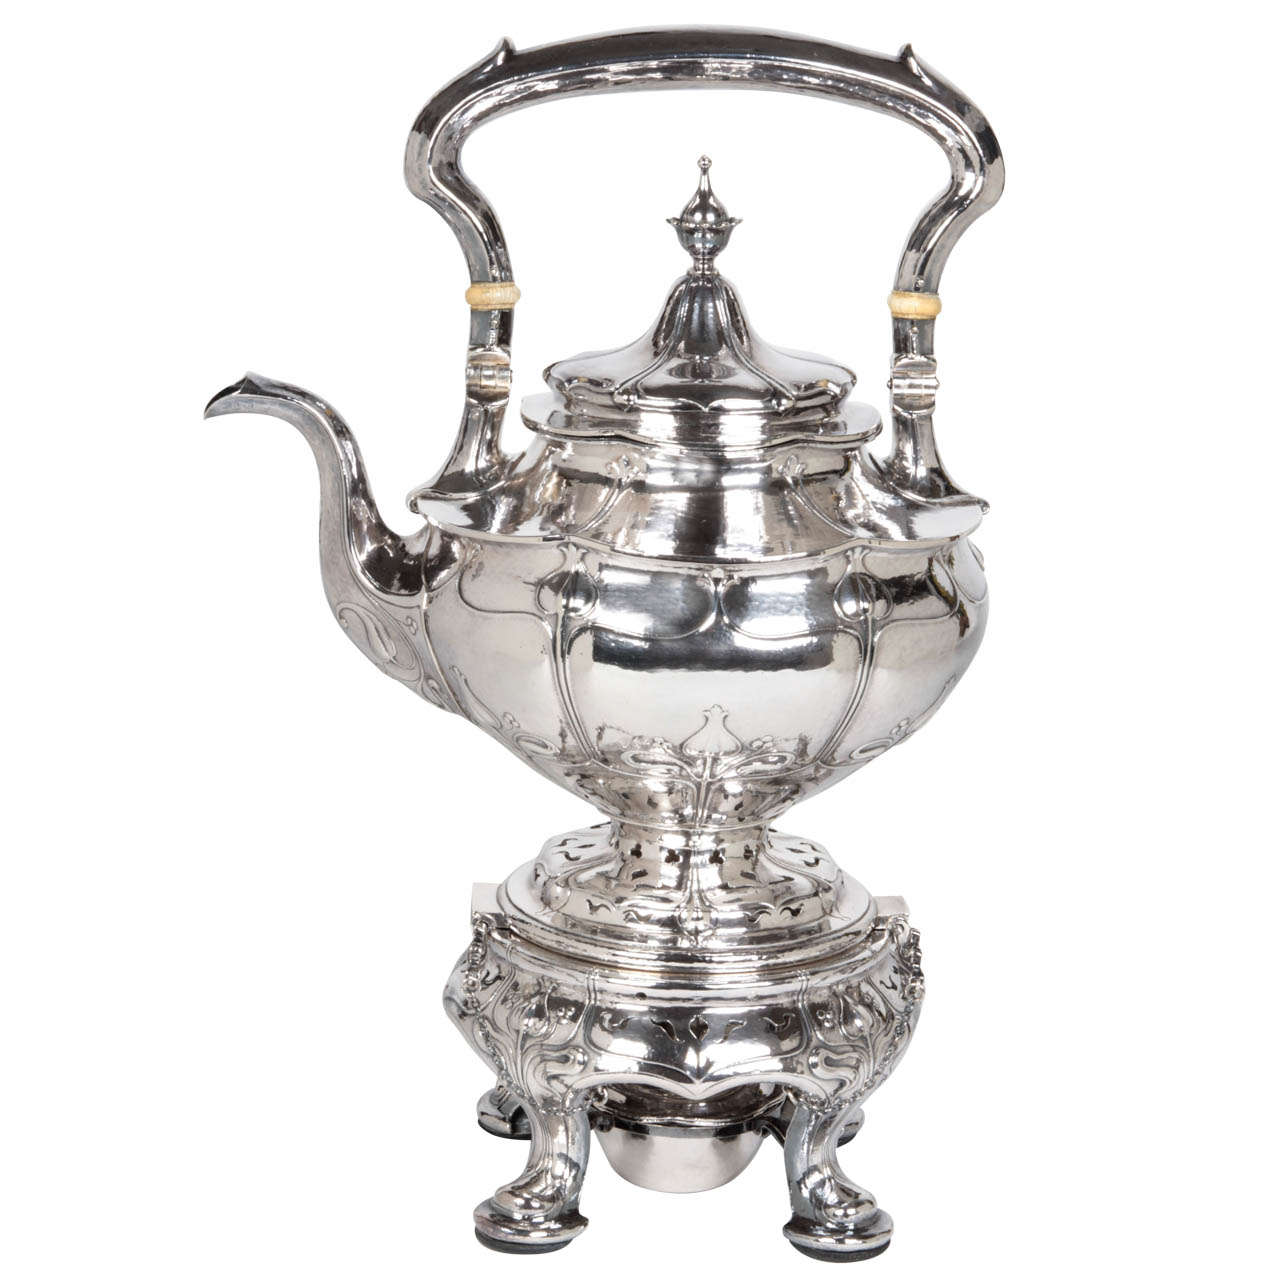 Martele Gorham/American Art Nouveau Handwrought Sterling Kettle-on-Stand c.1903 For Sale